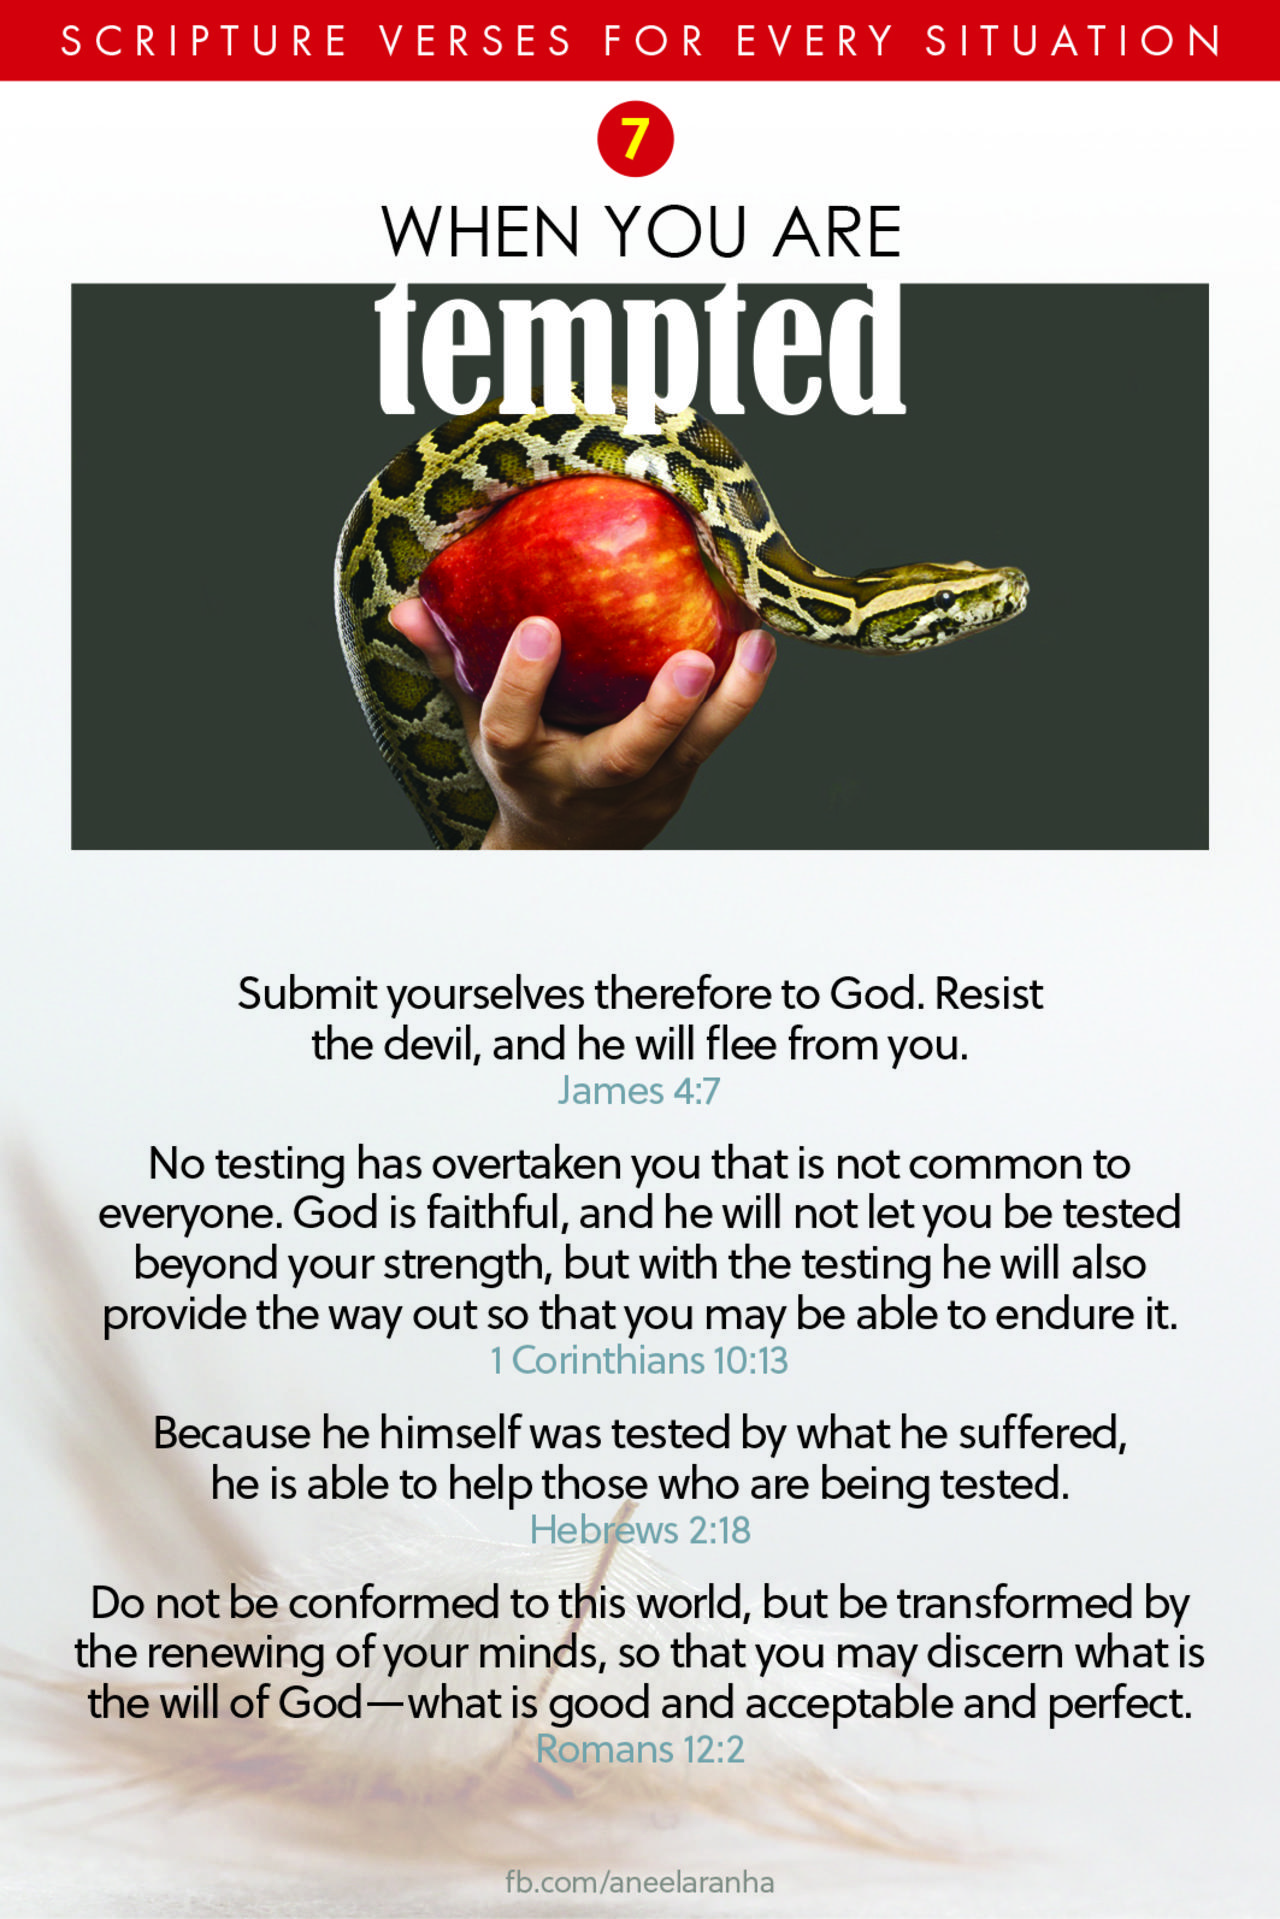 07. Are you tempted to sin?